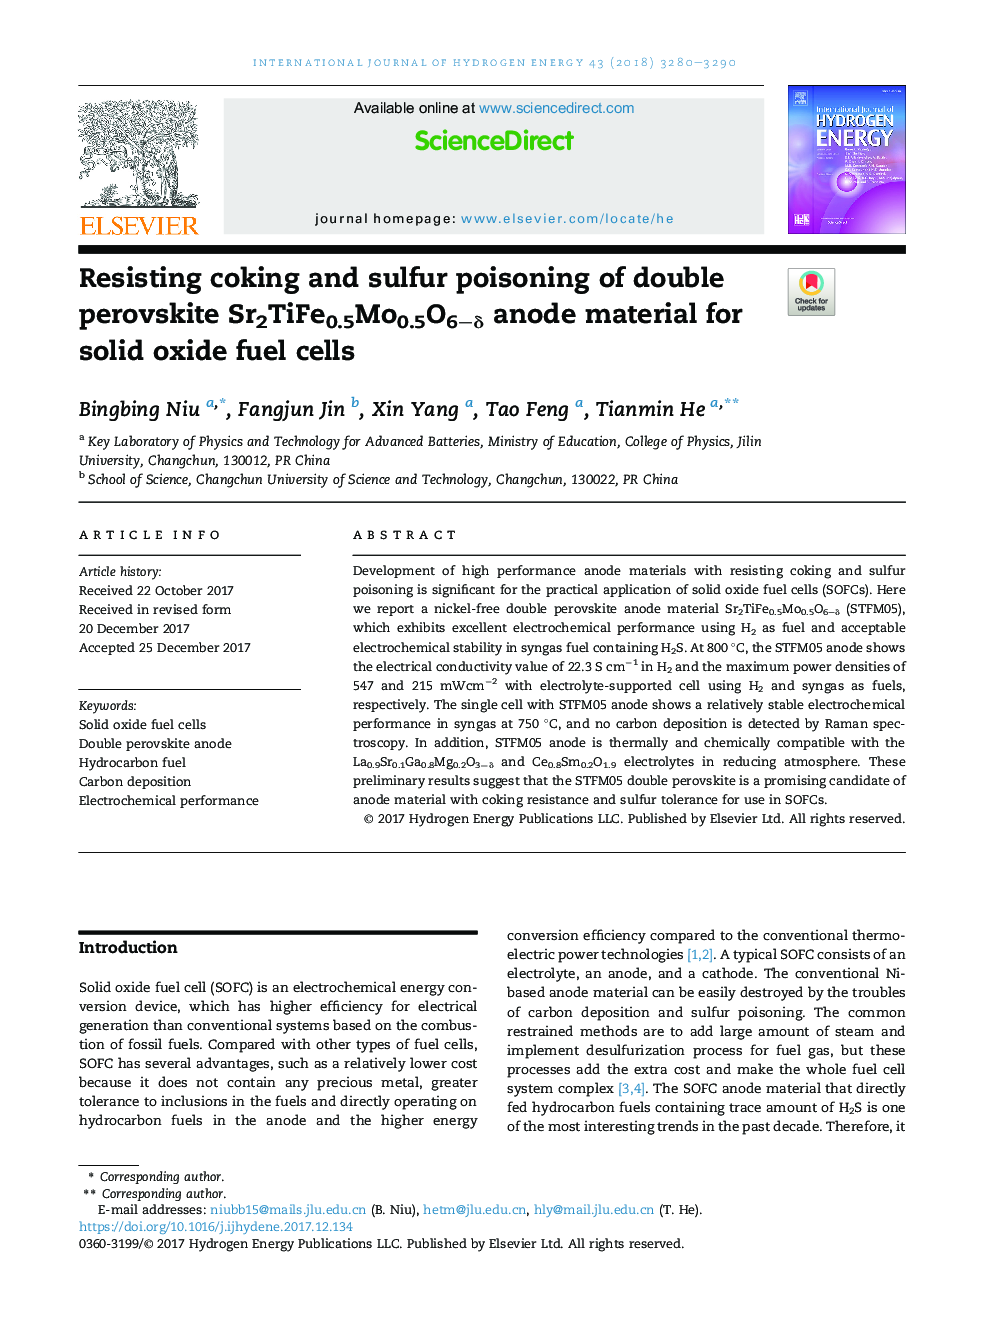 Resisting coking and sulfur poisoning of double perovskite Sr2TiFe0.5Mo0.5O6-Î´ anode material for solid oxide fuel cells